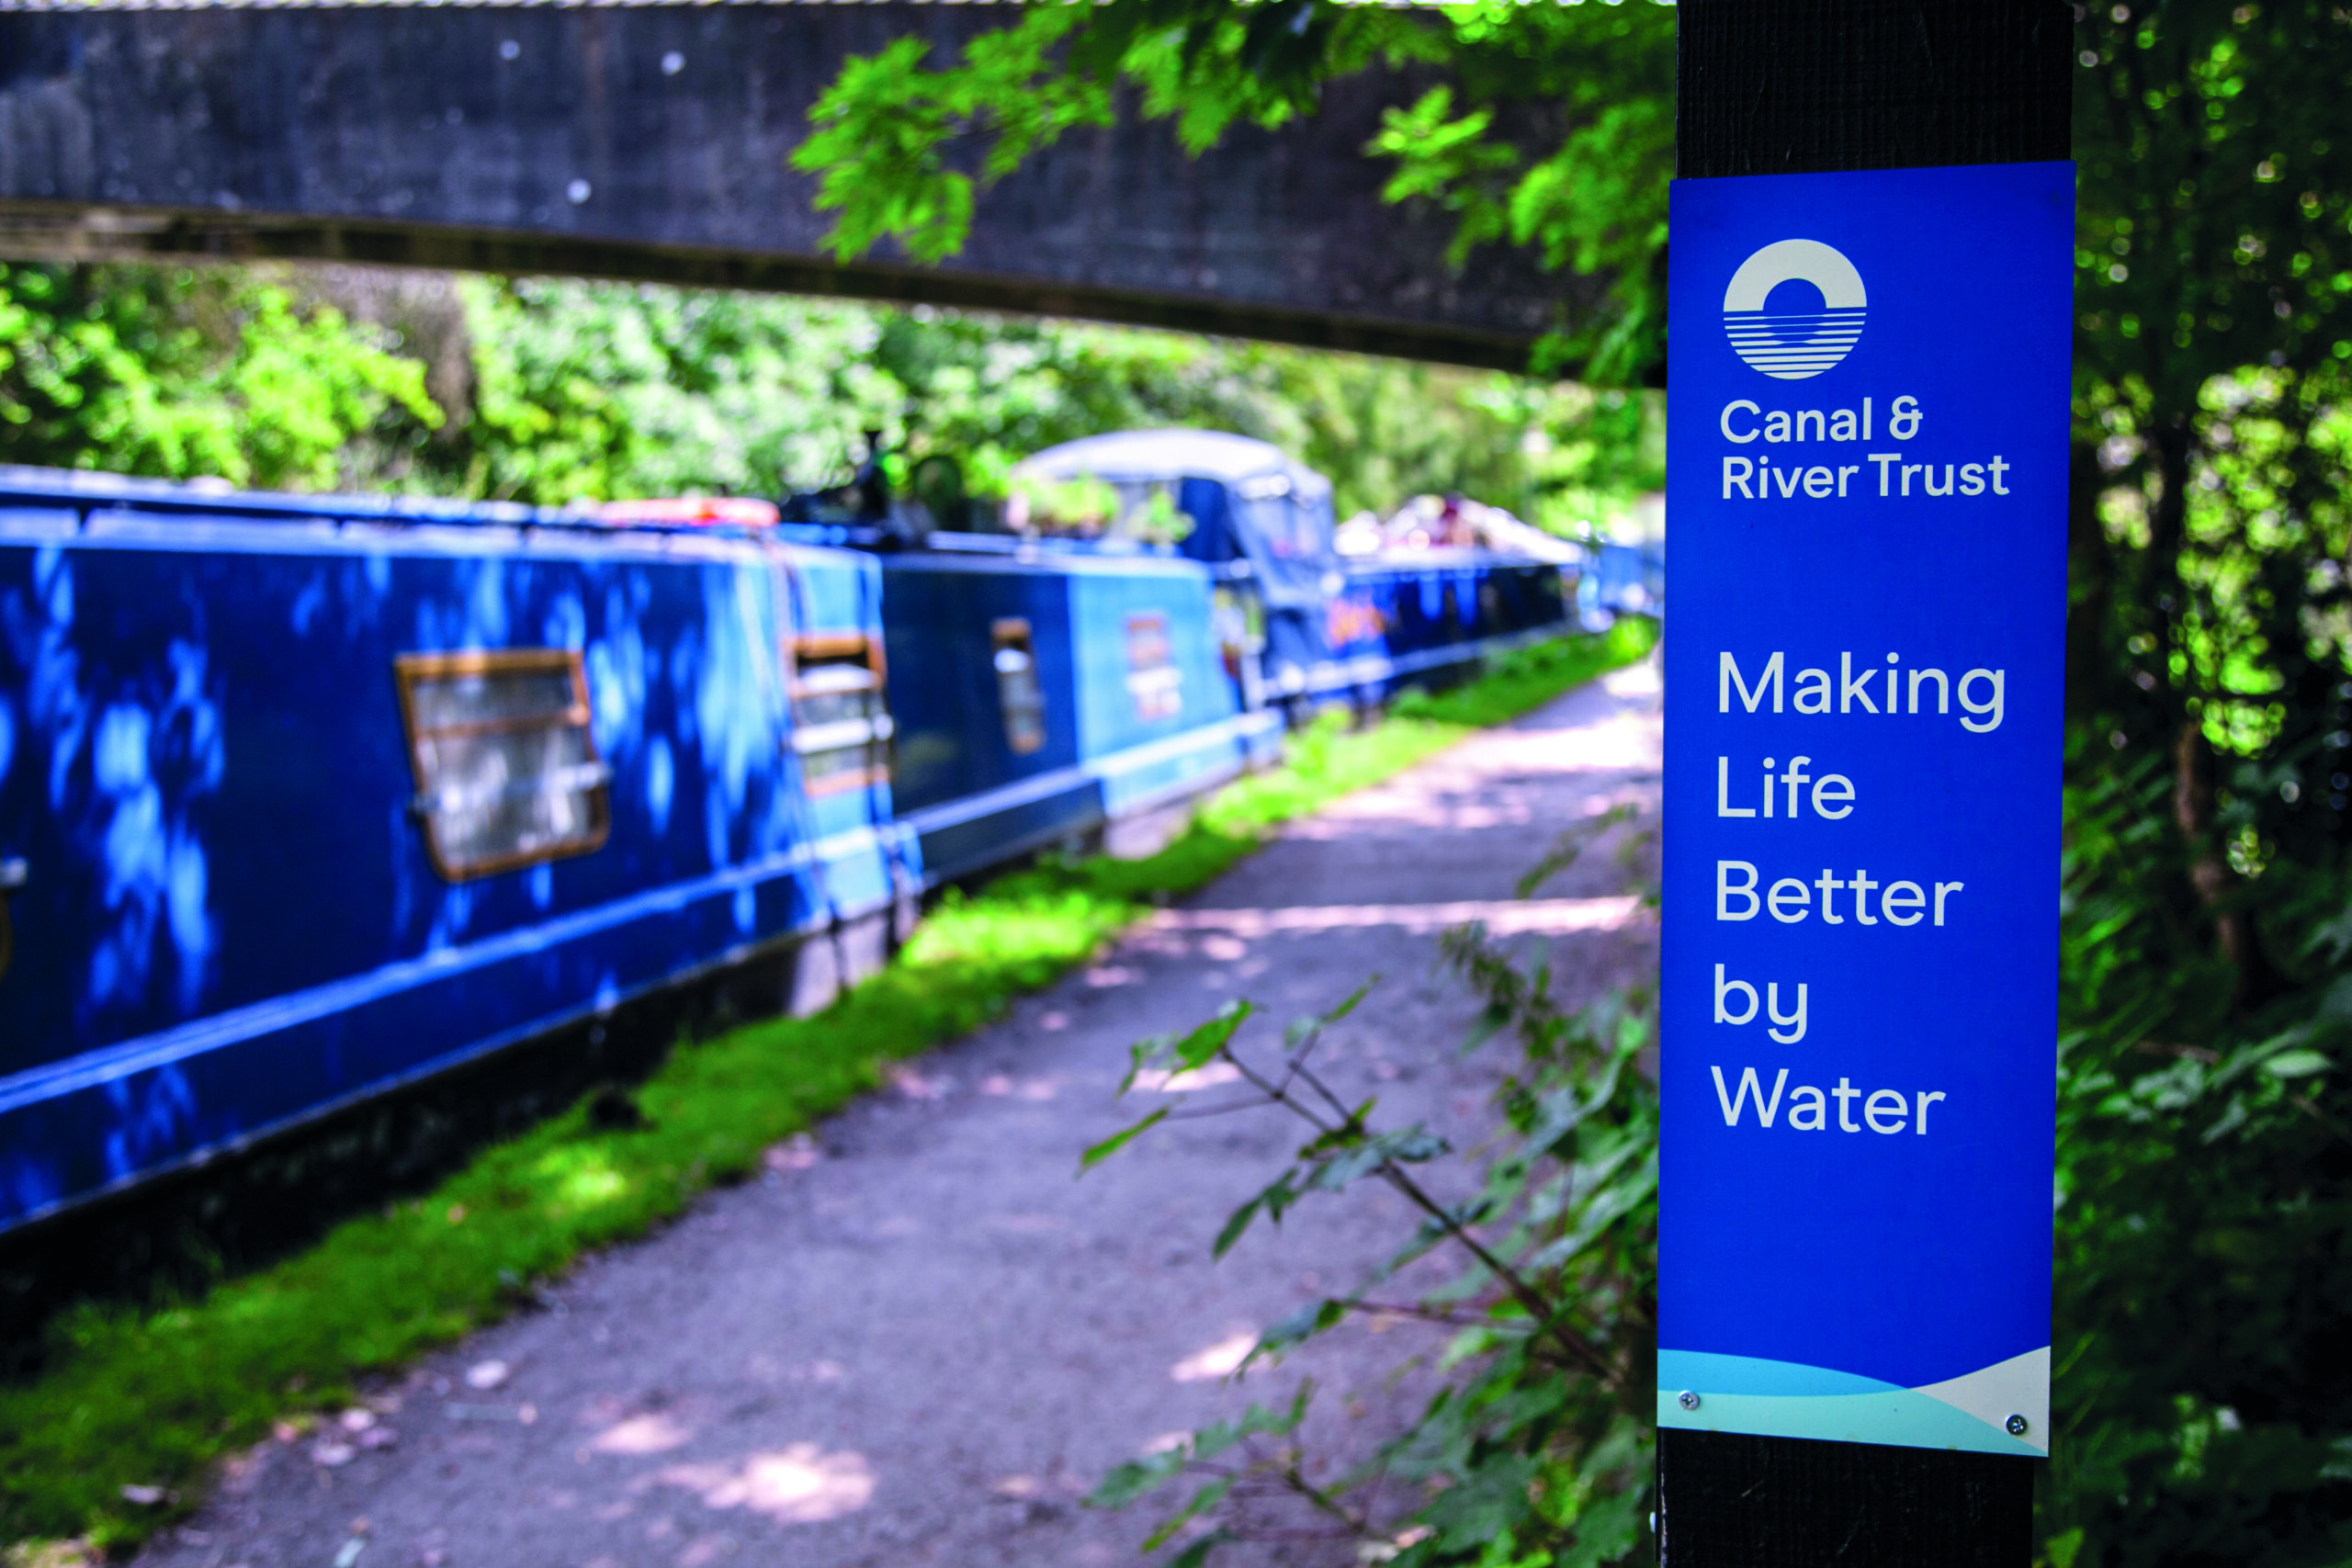 A blue canal boat moored alongside a paved towpath. A sign says 